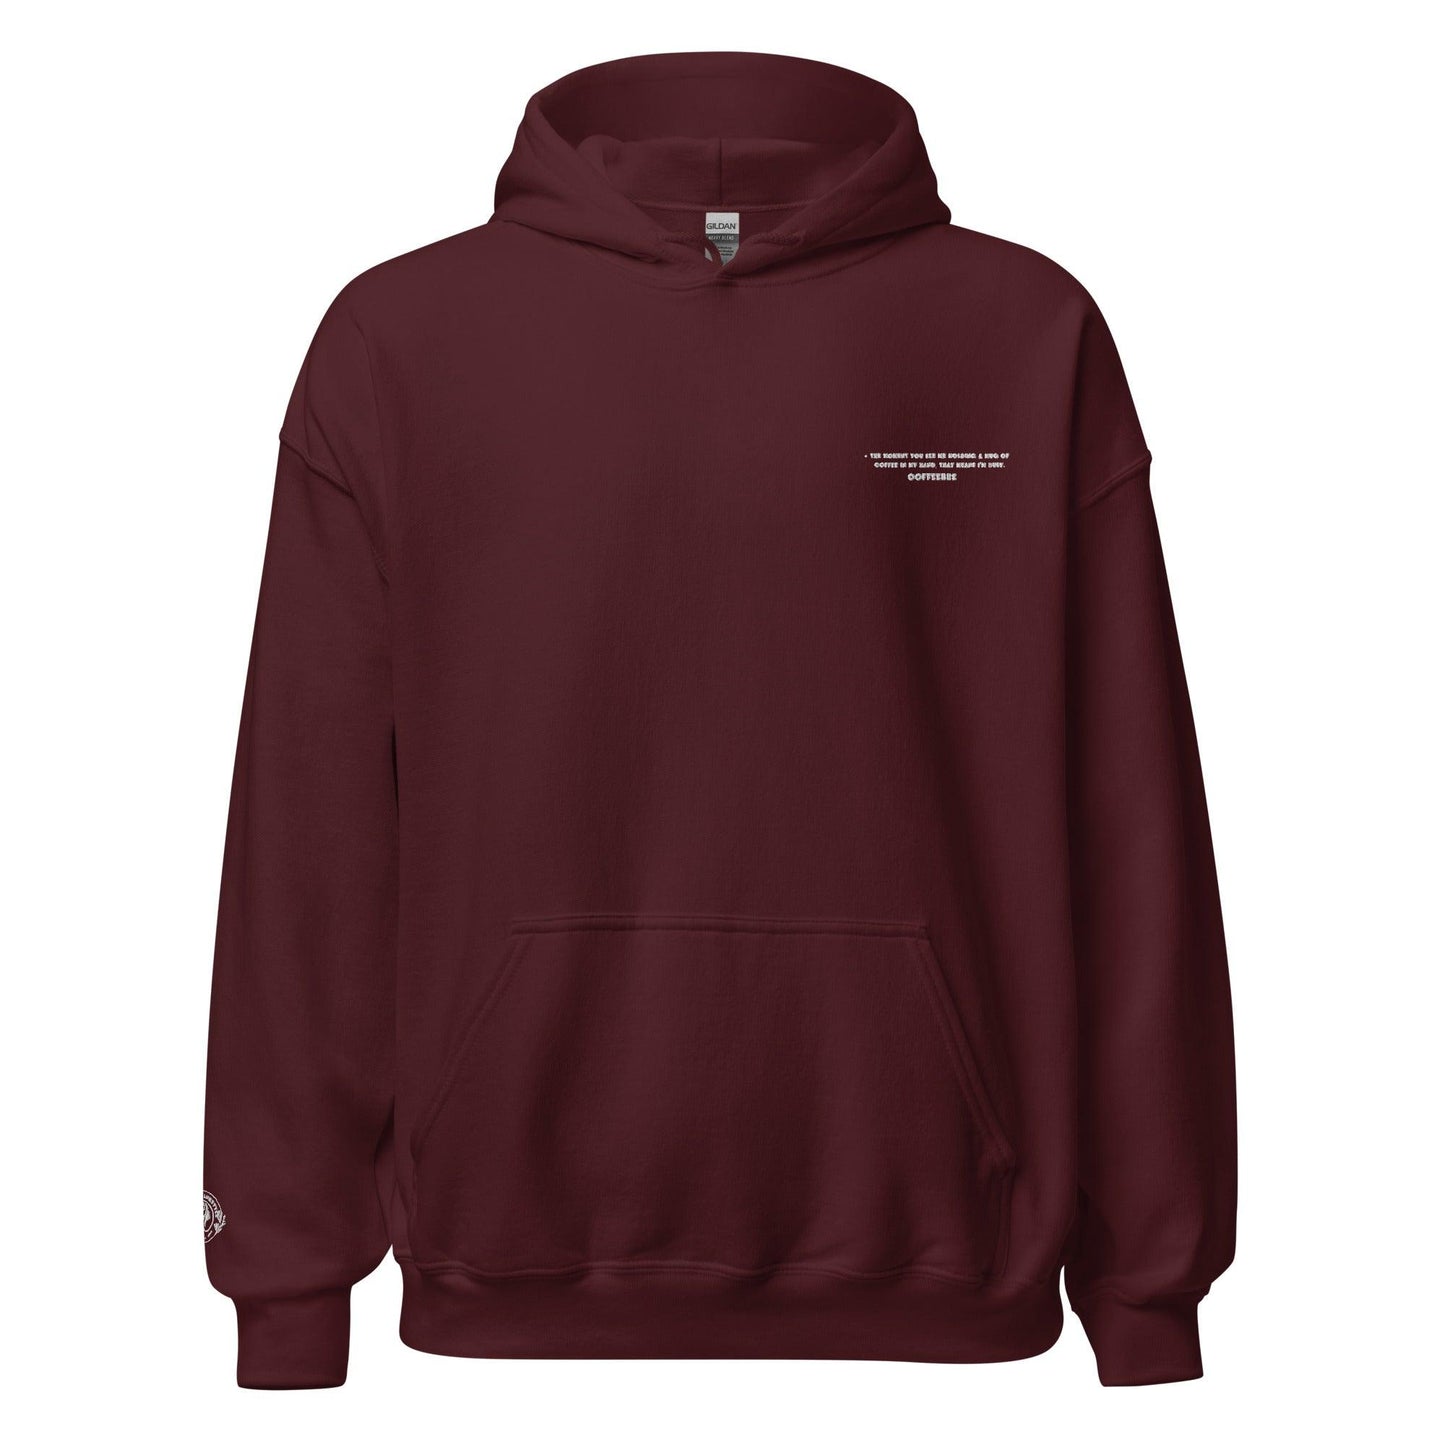 Embroidered Unisex Hoodie- The Essentials - COFFEEBRE